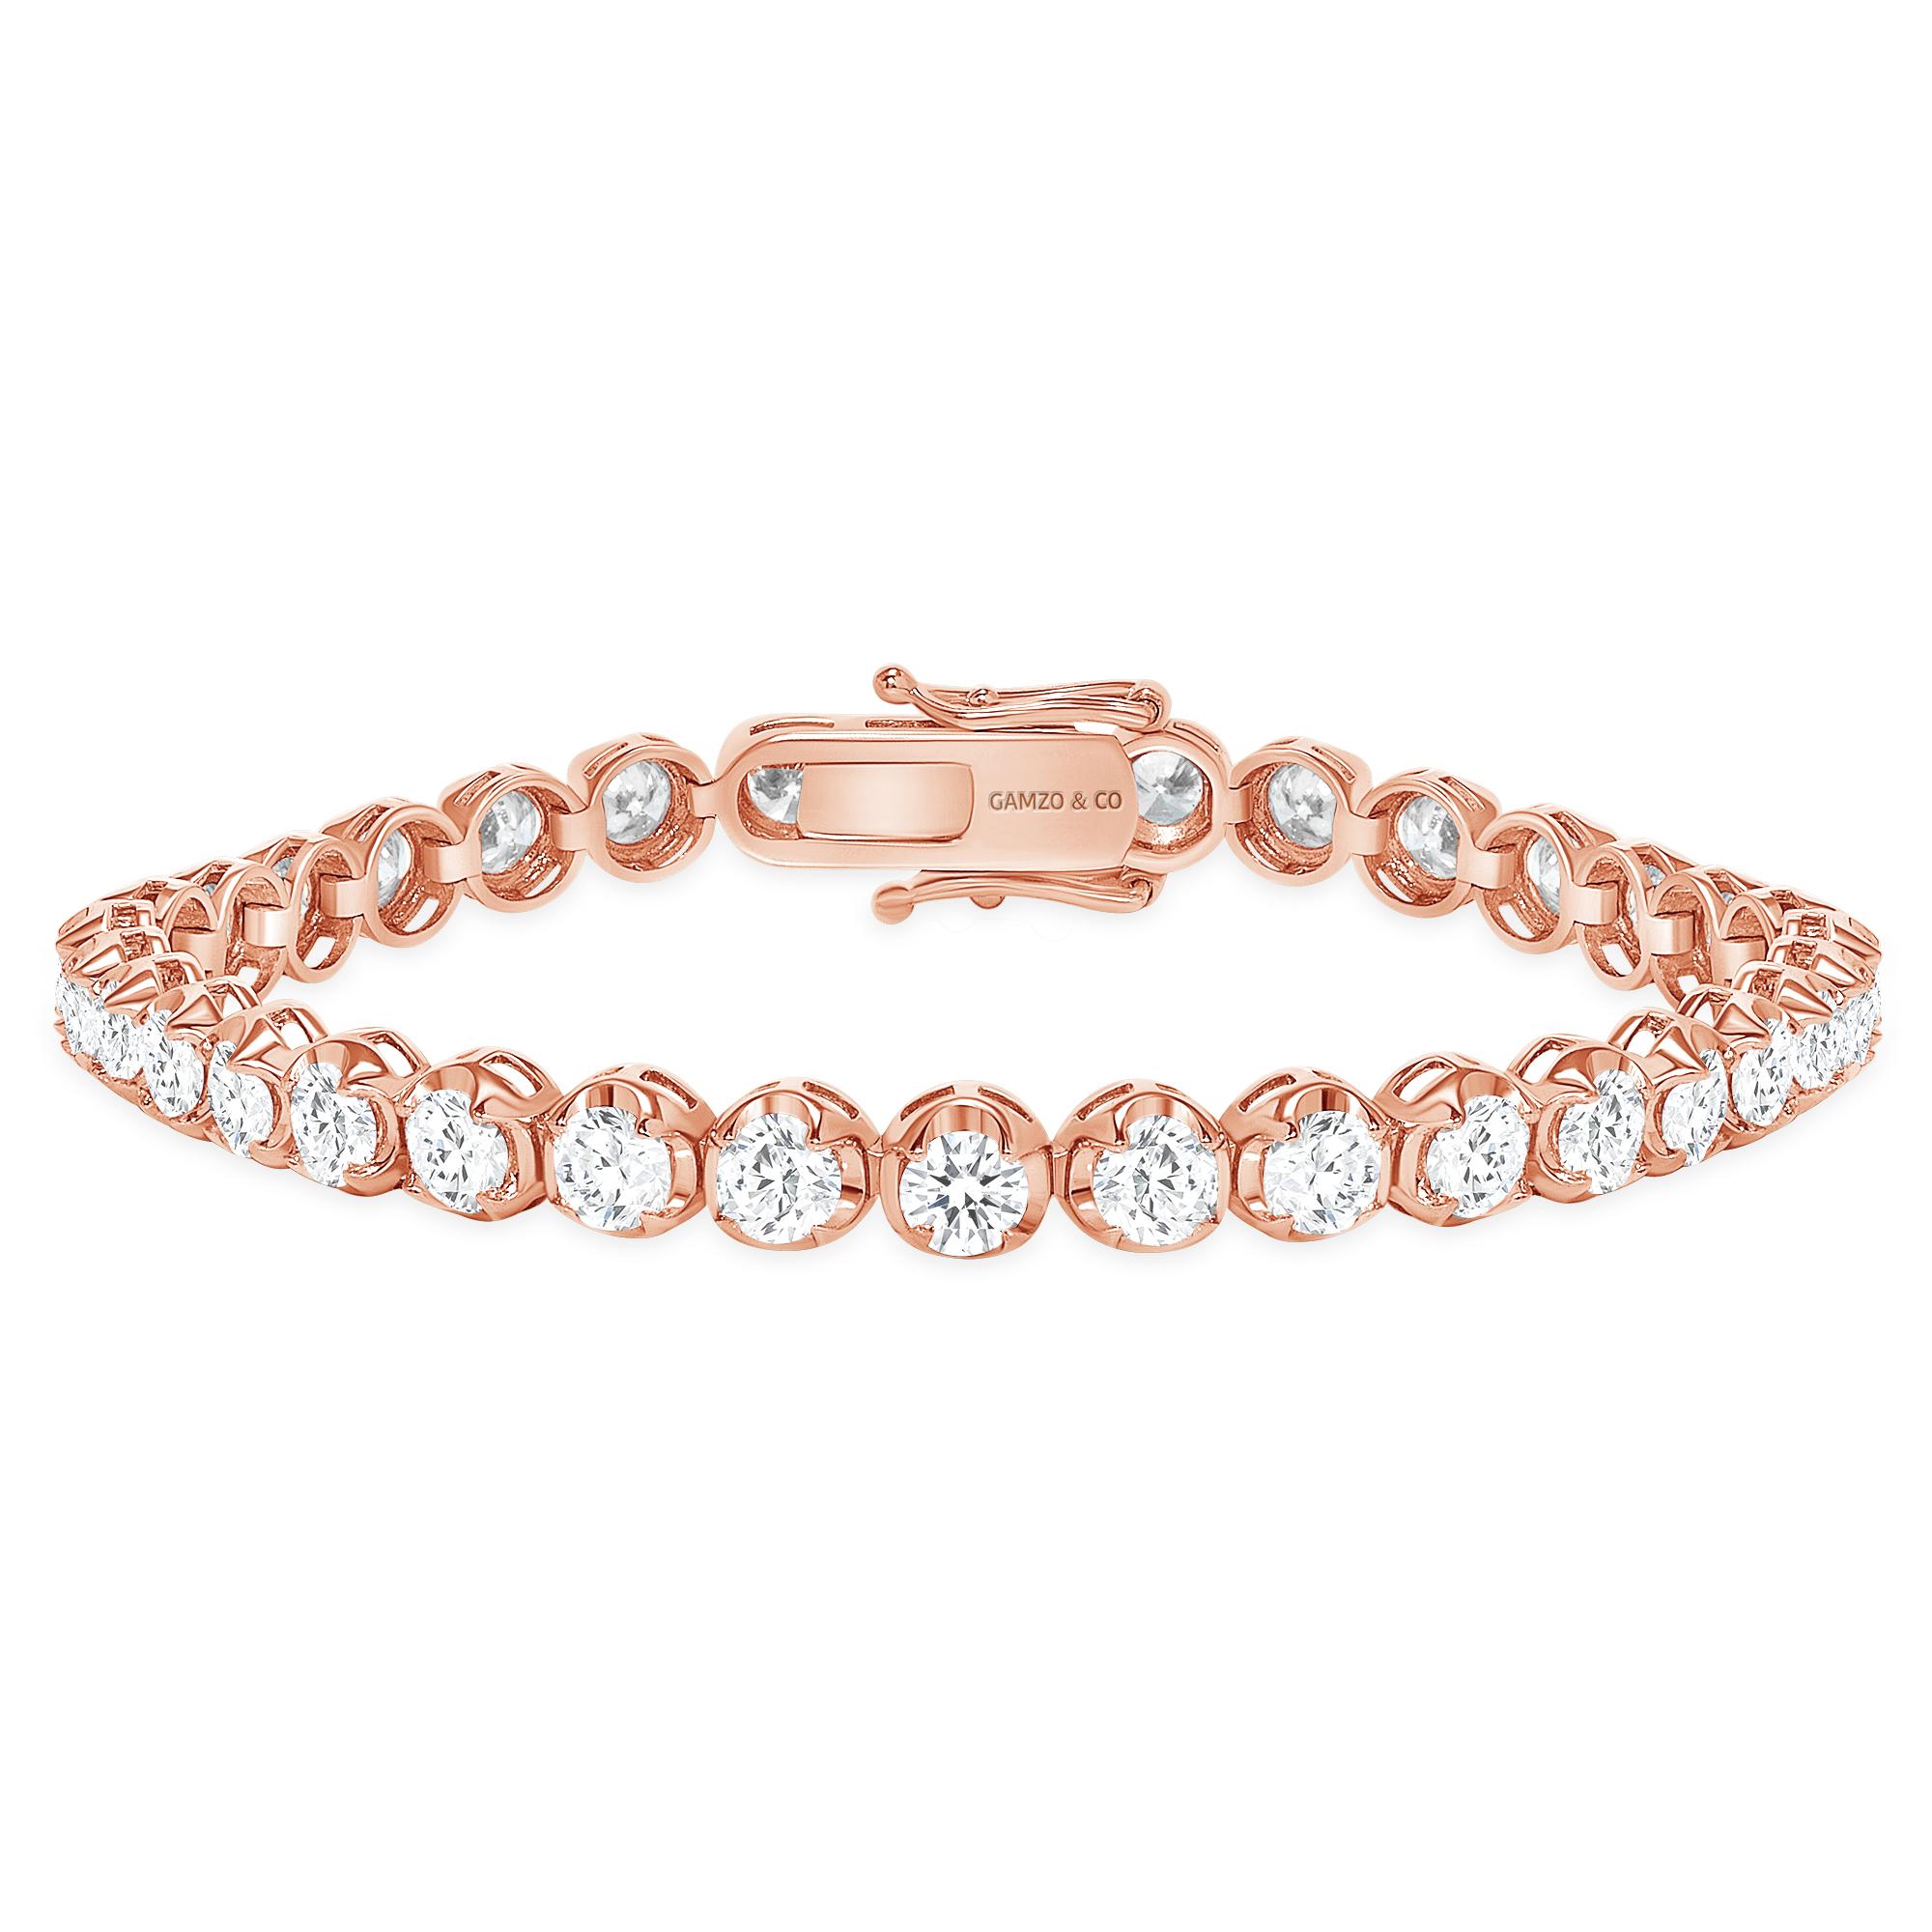 These beautiful round diamonds dance around your wrist as they absorb light and attention.
Metal: 14k Gold
Diamond Cut: Round
Diamond Total Carats: 5ct
Diamond Clarity: VS
Diamond Color: F
Color: Rose Gold
Bracelet Length: 6.5 Inches 
Included with